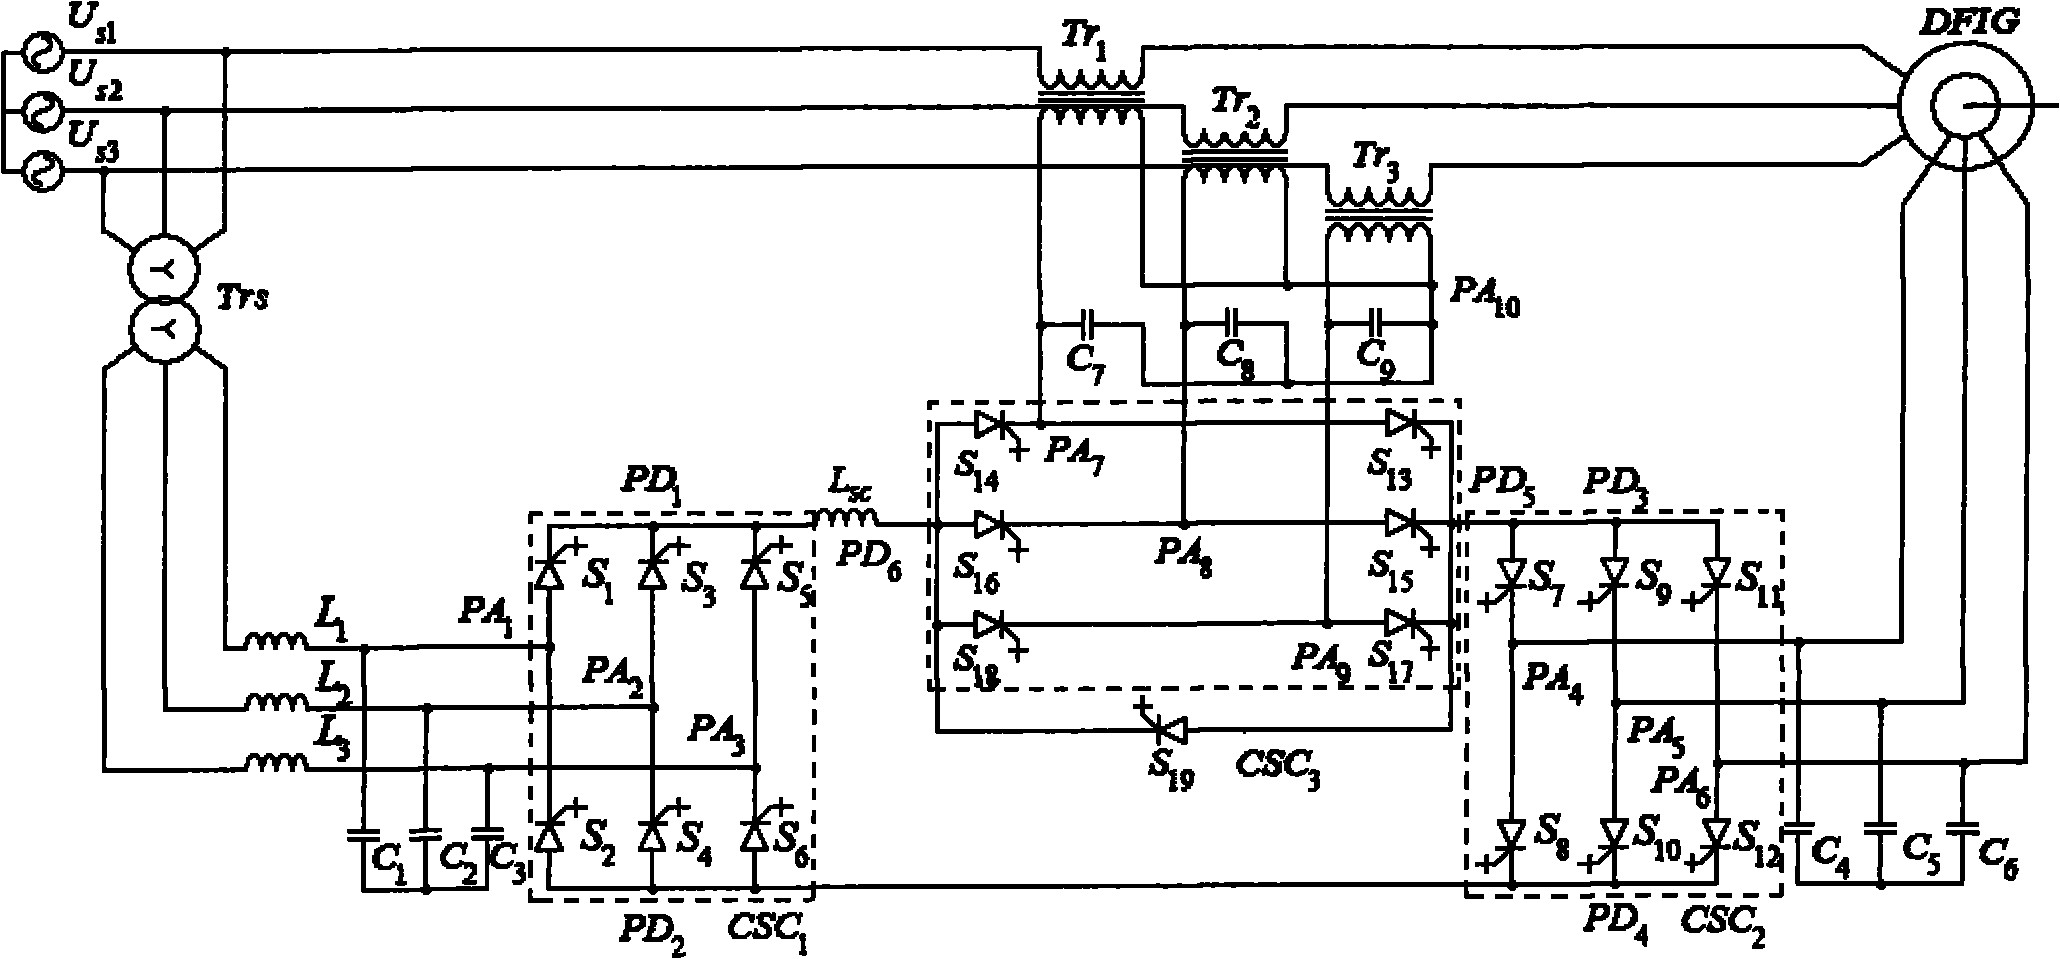 Low-voltage ride through circuit of double-feed type wind power generator